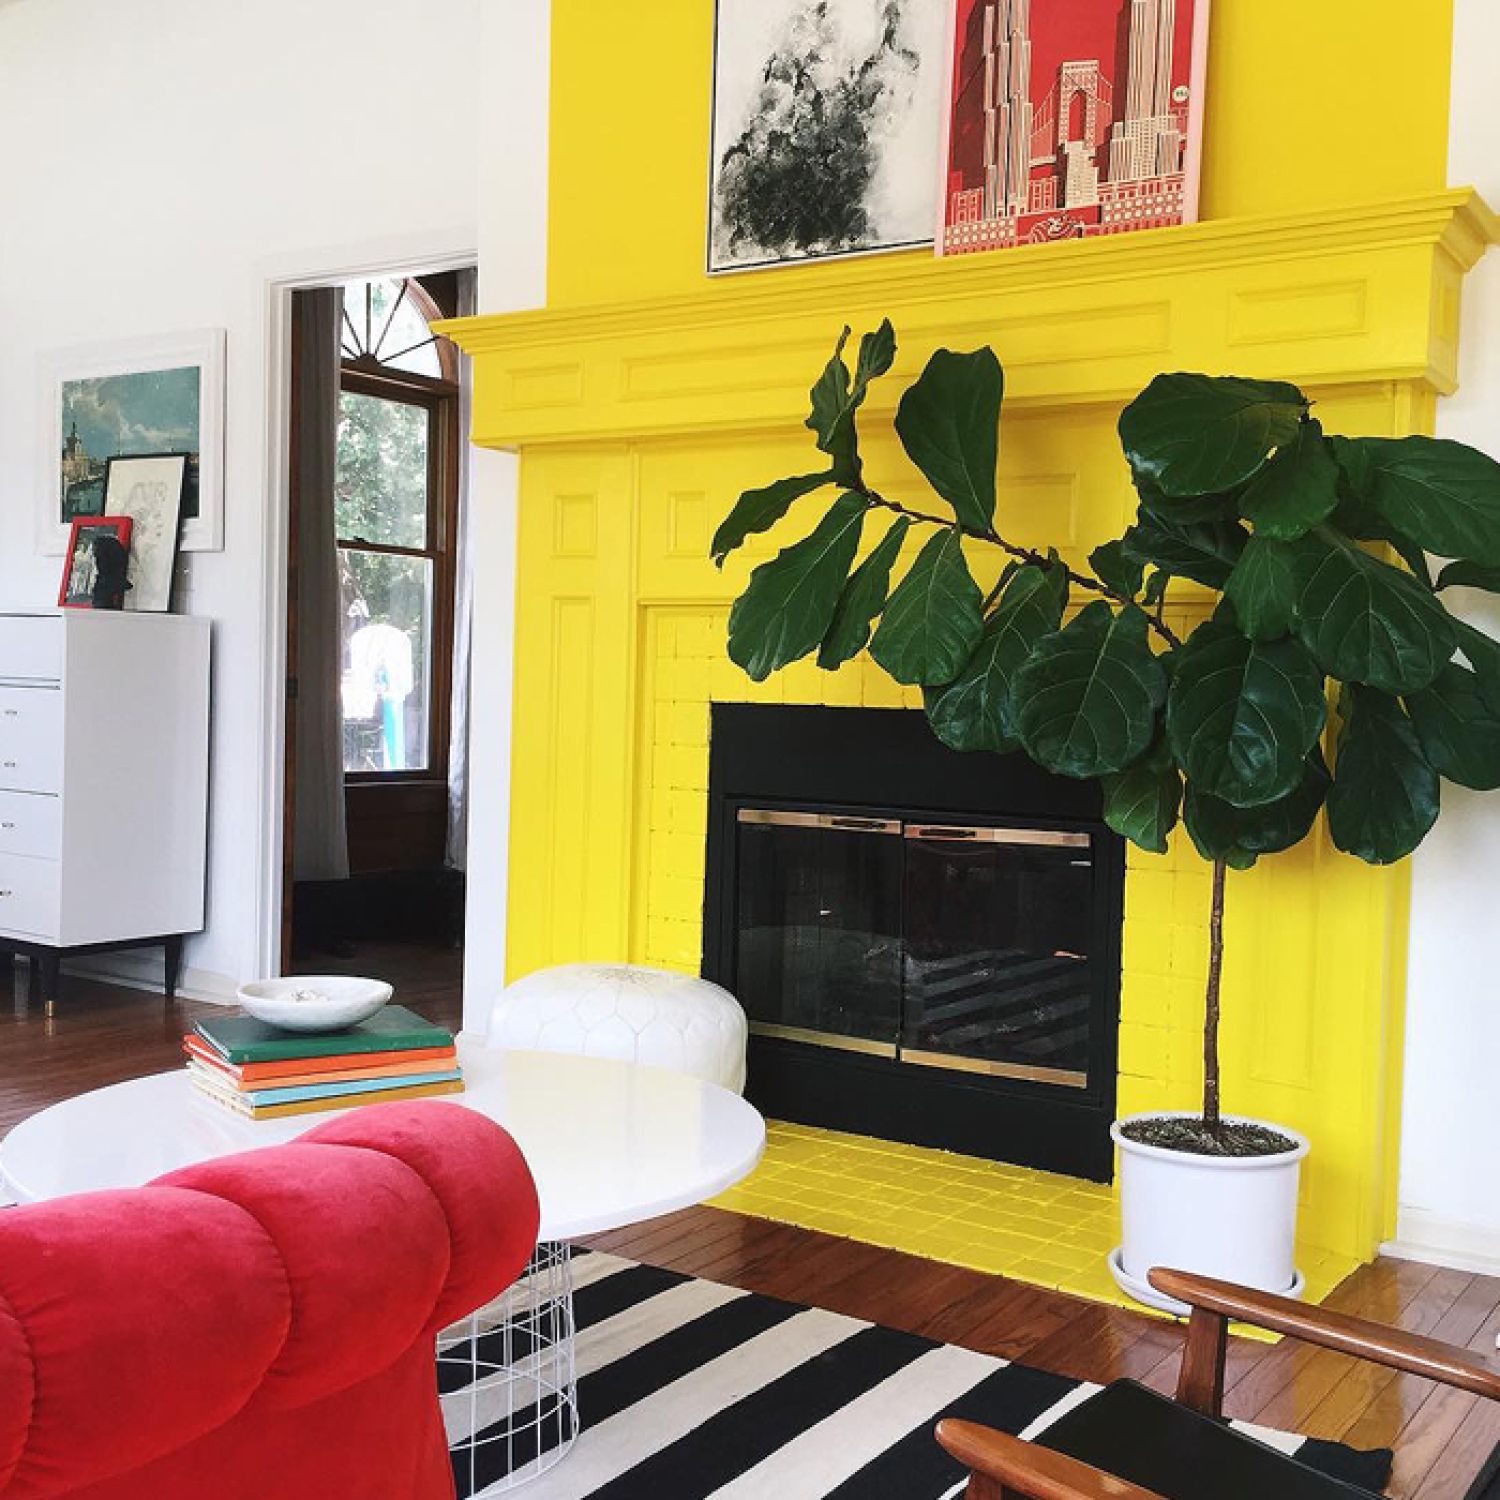 A bright yellow painted fireplace with fiddle leaf fig